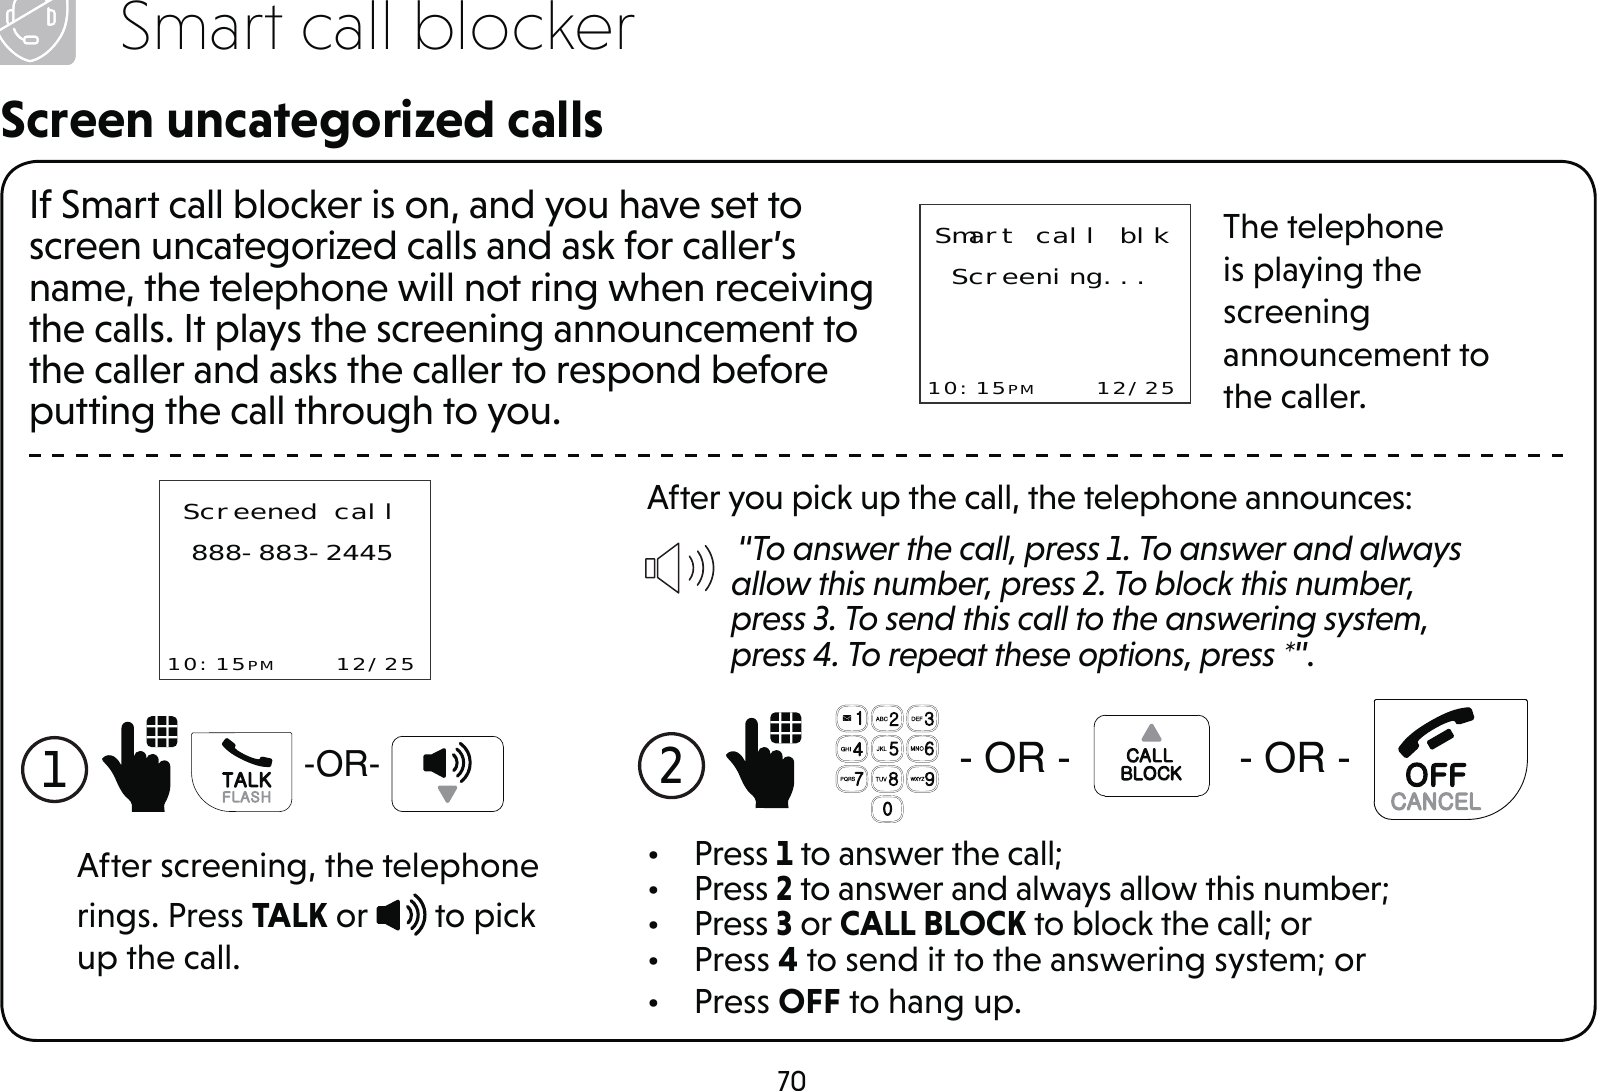 70Smart call blockerScreen uncategorized callsIf Smart call blocker is on, and you have set to screen uncategorized calls and ask for caller’s name, the telephone will not ring when receiving the calls. It plays the screening announcement to the caller and asks the caller to respond before putting the call through to you.Smart call blkScreening...10:15PM    12/25The telephone is playing the screening announcement to the caller.After you pick up the call, the telephone announces: “To answer the call, press 1. To answer and always allow this number, press 2. To block this number, press 3. To send this call to the answering system, press 4. To repeat these options, press *”.2  25 25• Press 1 to answer the call;• Press 2 to answer and always allow this number;• Press 3 or CALL BLOCK to block the call; or• Press 4 to send it to the answering system; or• Press OFF to hang up.Screened call888-883-244510:15PM    12/25After screening, the telephone rings. Press TALK or   to pick up the call.1 25